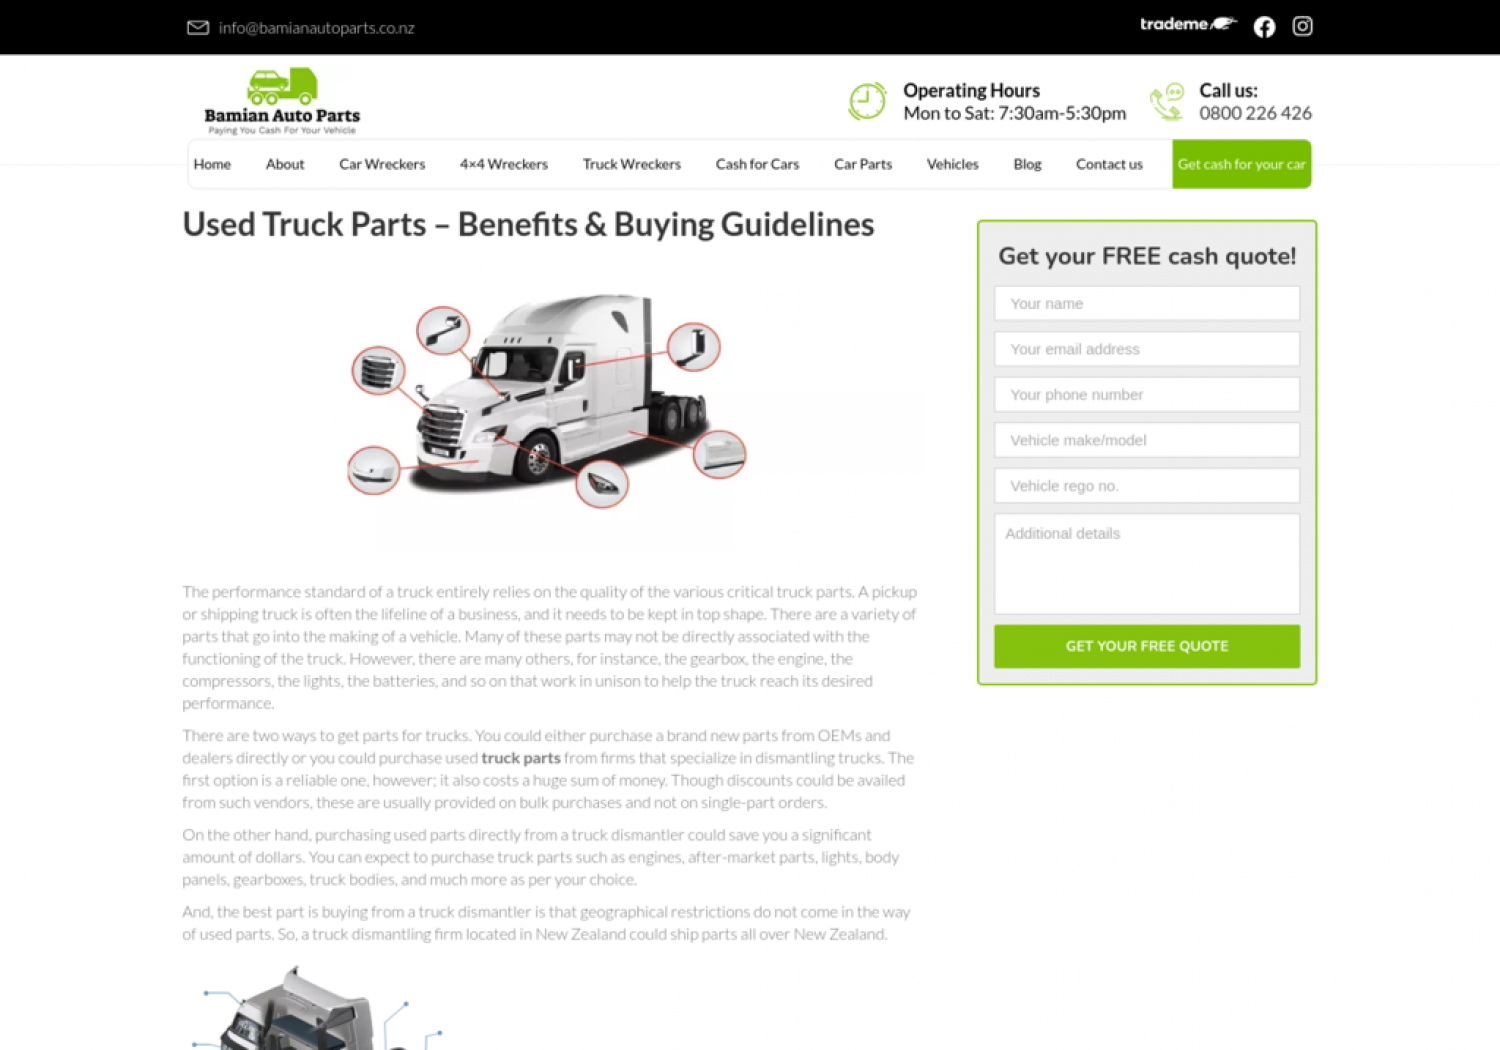 Used Parts For a Truck | Bamian Auto Parts Infographic